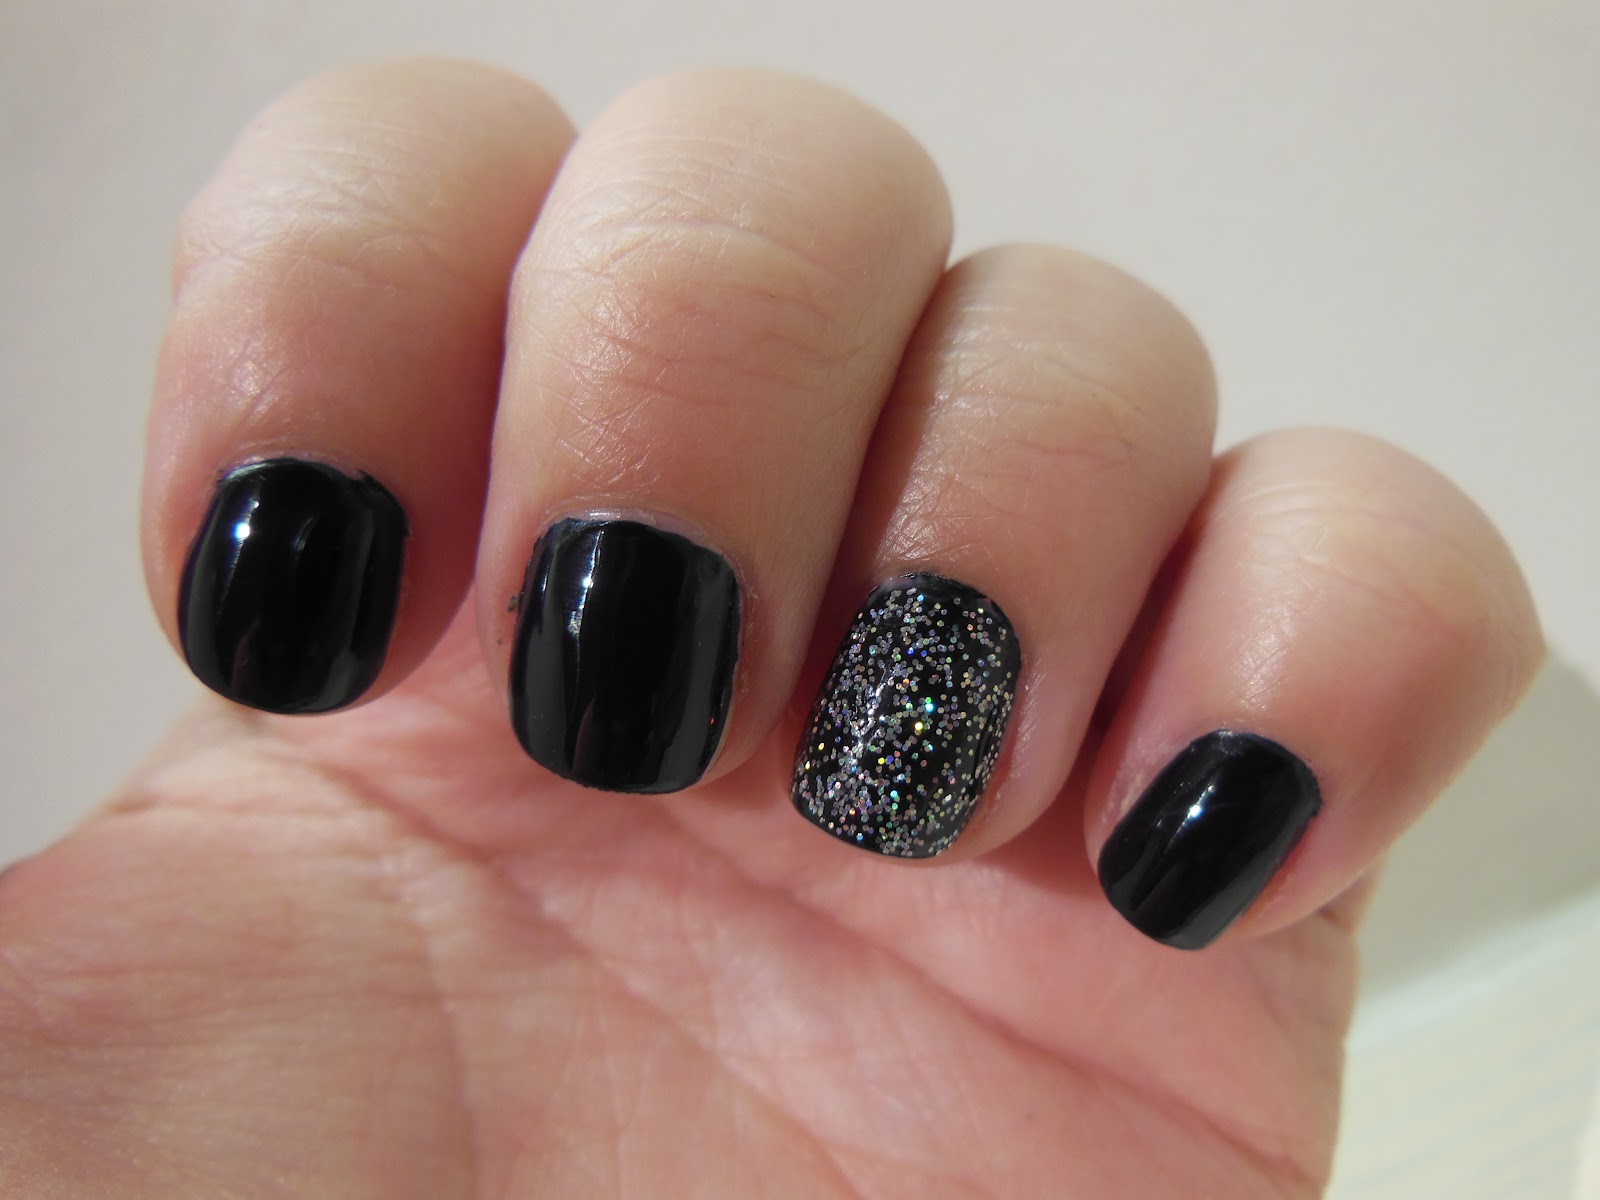 3. Glittery Panic at the Disco nails - wide 7